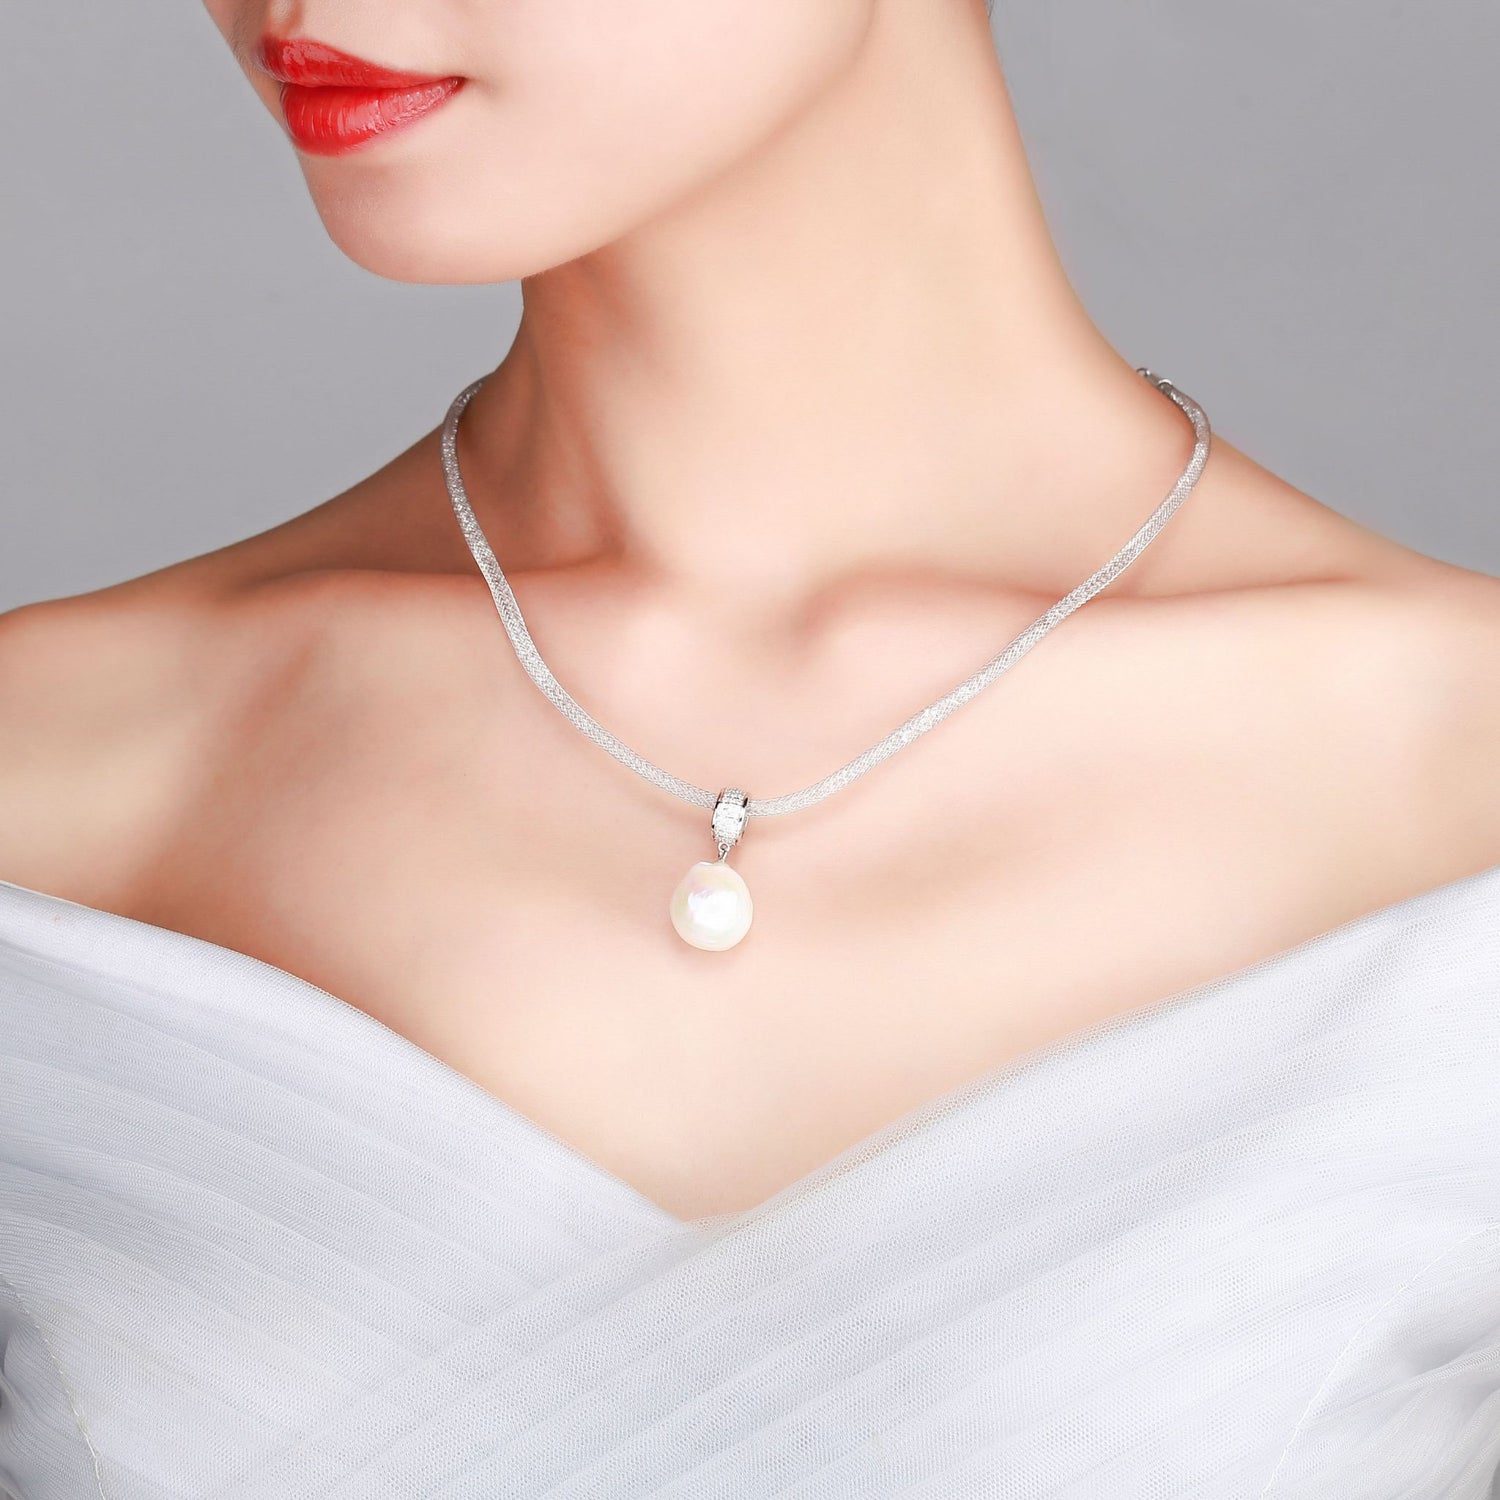 GIANT BAROQUE PEARL FORTUNE ROLL NECKLACE - Timeless Pearl